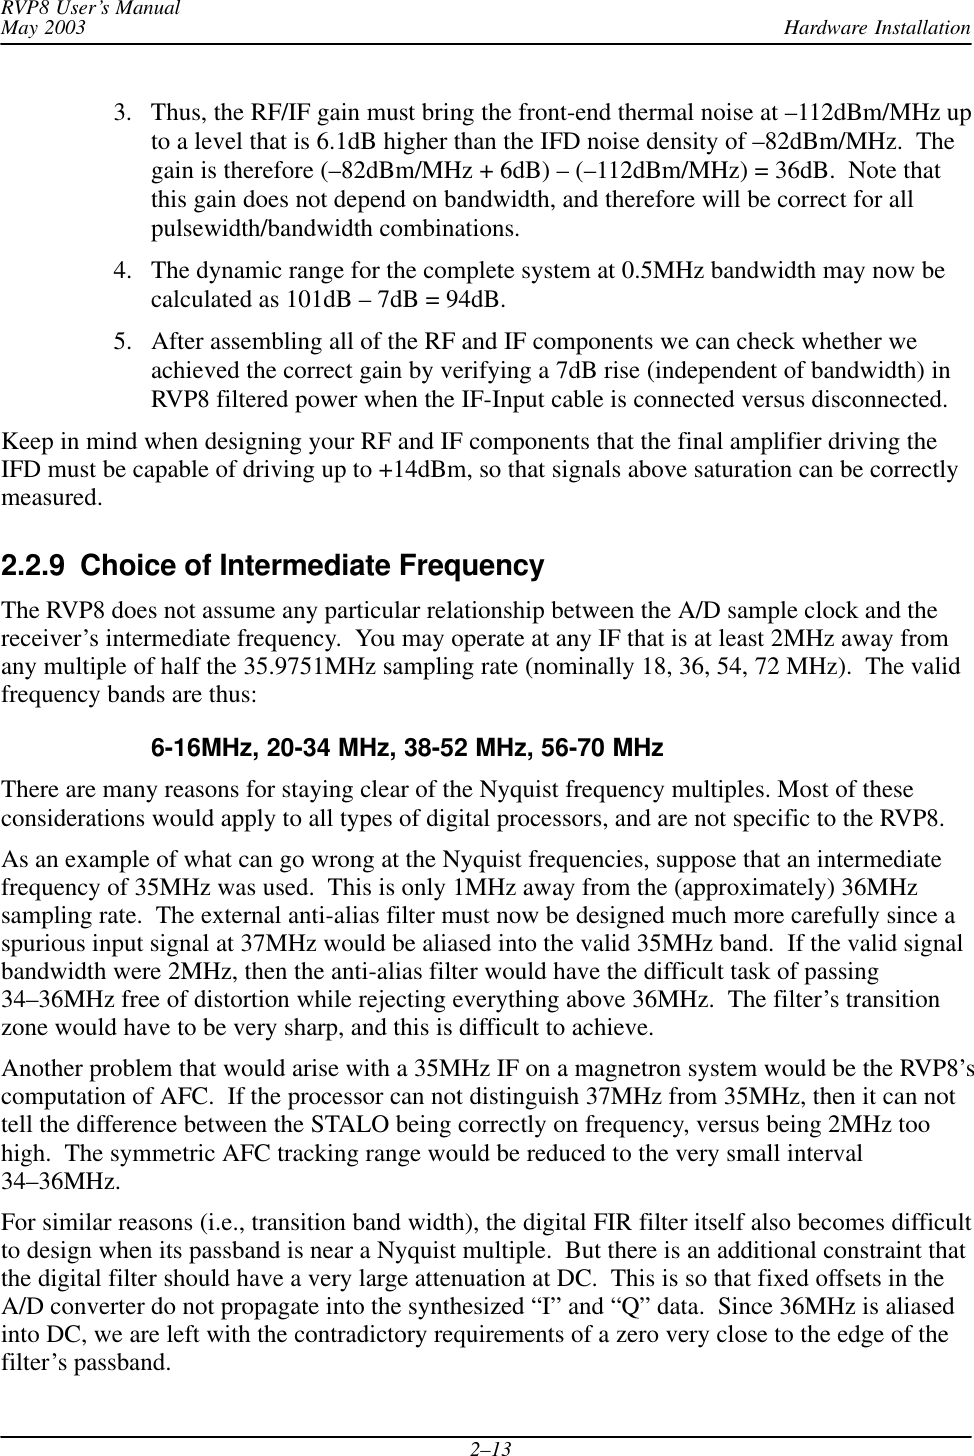 Hardware InstallationRVP8 User’s ManualMay 20032–133. Thus, the RF/IF gain must bring the front-end thermal noise at –112dBm/MHz upto a level that is 6.1dB higher than the IFD noise density of –82dBm/MHz.  Thegain is therefore (–82dBm/MHz + 6dB) – (–112dBm/MHz) = 36dB.  Note thatthis gain does not depend on bandwidth, and therefore will be correct for allpulsewidth/bandwidth combinations.4. The dynamic range for the complete system at 0.5MHz bandwidth may now becalculated as 101dB – 7dB = 94dB.5. After assembling all of the RF and IF components we can check whether weachieved the correct gain by verifying a 7dB rise (independent of bandwidth) inRVP8 filtered power when the IF-Input cable is connected versus disconnected.Keep in mind when designing your RF and IF components that the final amplifier driving theIFD must be capable of driving up to +14dBm, so that signals above saturation can be correctlymeasured.2.2.9  Choice of Intermediate FrequencyThe RVP8 does not assume any particular relationship between the A/D sample clock and thereceiver’s intermediate frequency.  You may operate at any IF that is at least 2MHz away fromany multiple of half the 35.9751MHz sampling rate (nominally 18, 36, 54, 72 MHz).  The validfrequency bands are thus:6-16MHz, 20-34 MHz, 38-52 MHz, 56-70 MHzThere are many reasons for staying clear of the Nyquist frequency multiples. Most of theseconsiderations would apply to all types of digital processors, and are not specific to the RVP8.As an example of what can go wrong at the Nyquist frequencies, suppose that an intermediatefrequency of 35MHz was used.  This is only 1MHz away from the (approximately) 36MHzsampling rate.  The external anti-alias filter must now be designed much more carefully since aspurious input signal at 37MHz would be aliased into the valid 35MHz band.  If the valid signalbandwidth were 2MHz, then the anti-alias filter would have the difficult task of passing34–36MHz free of distortion while rejecting everything above 36MHz.  The filter’s transitionzone would have to be very sharp, and this is difficult to achieve.Another problem that would arise with a 35MHz IF on a magnetron system would be the RVP8’scomputation of AFC.  If the processor can not distinguish 37MHz from 35MHz, then it can nottell the difference between the STALO being correctly on frequency, versus being 2MHz toohigh.  The symmetric AFC tracking range would be reduced to the very small interval34–36MHz.For similar reasons (i.e., transition band width), the digital FIR filter itself also becomes difficultto design when its passband is near a Nyquist multiple.  But there is an additional constraint thatthe digital filter should have a very large attenuation at DC.  This is so that fixed offsets in theA/D converter do not propagate into the synthesized “I” and “Q” data.  Since 36MHz is aliasedinto DC, we are left with the contradictory requirements of a zero very close to the edge of thefilter’s passband.